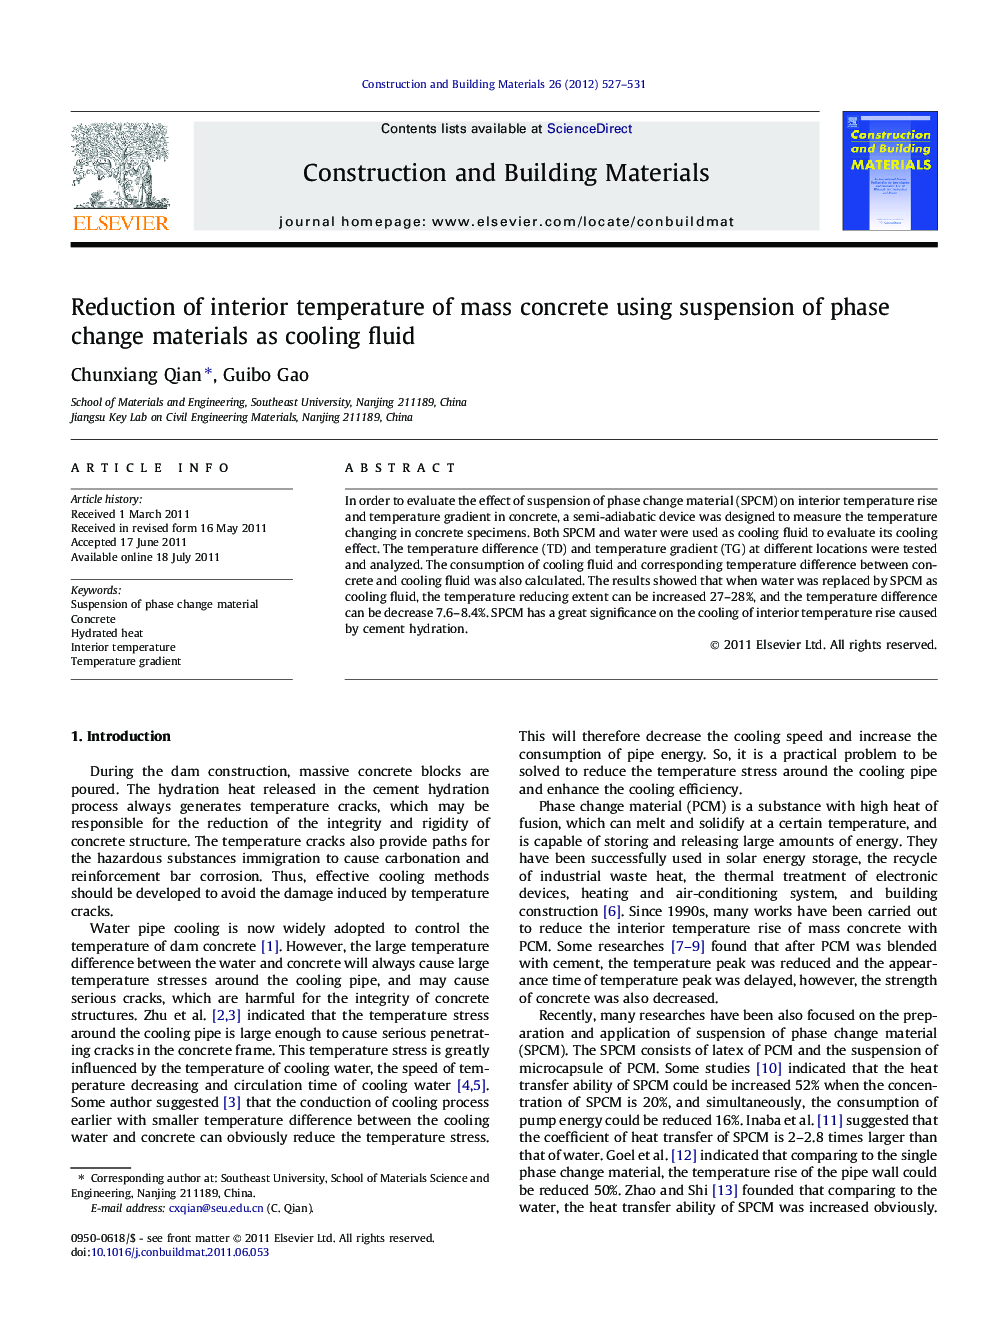 Reduction of interior temperature of mass concrete using suspension of phase change materials as cooling fluid